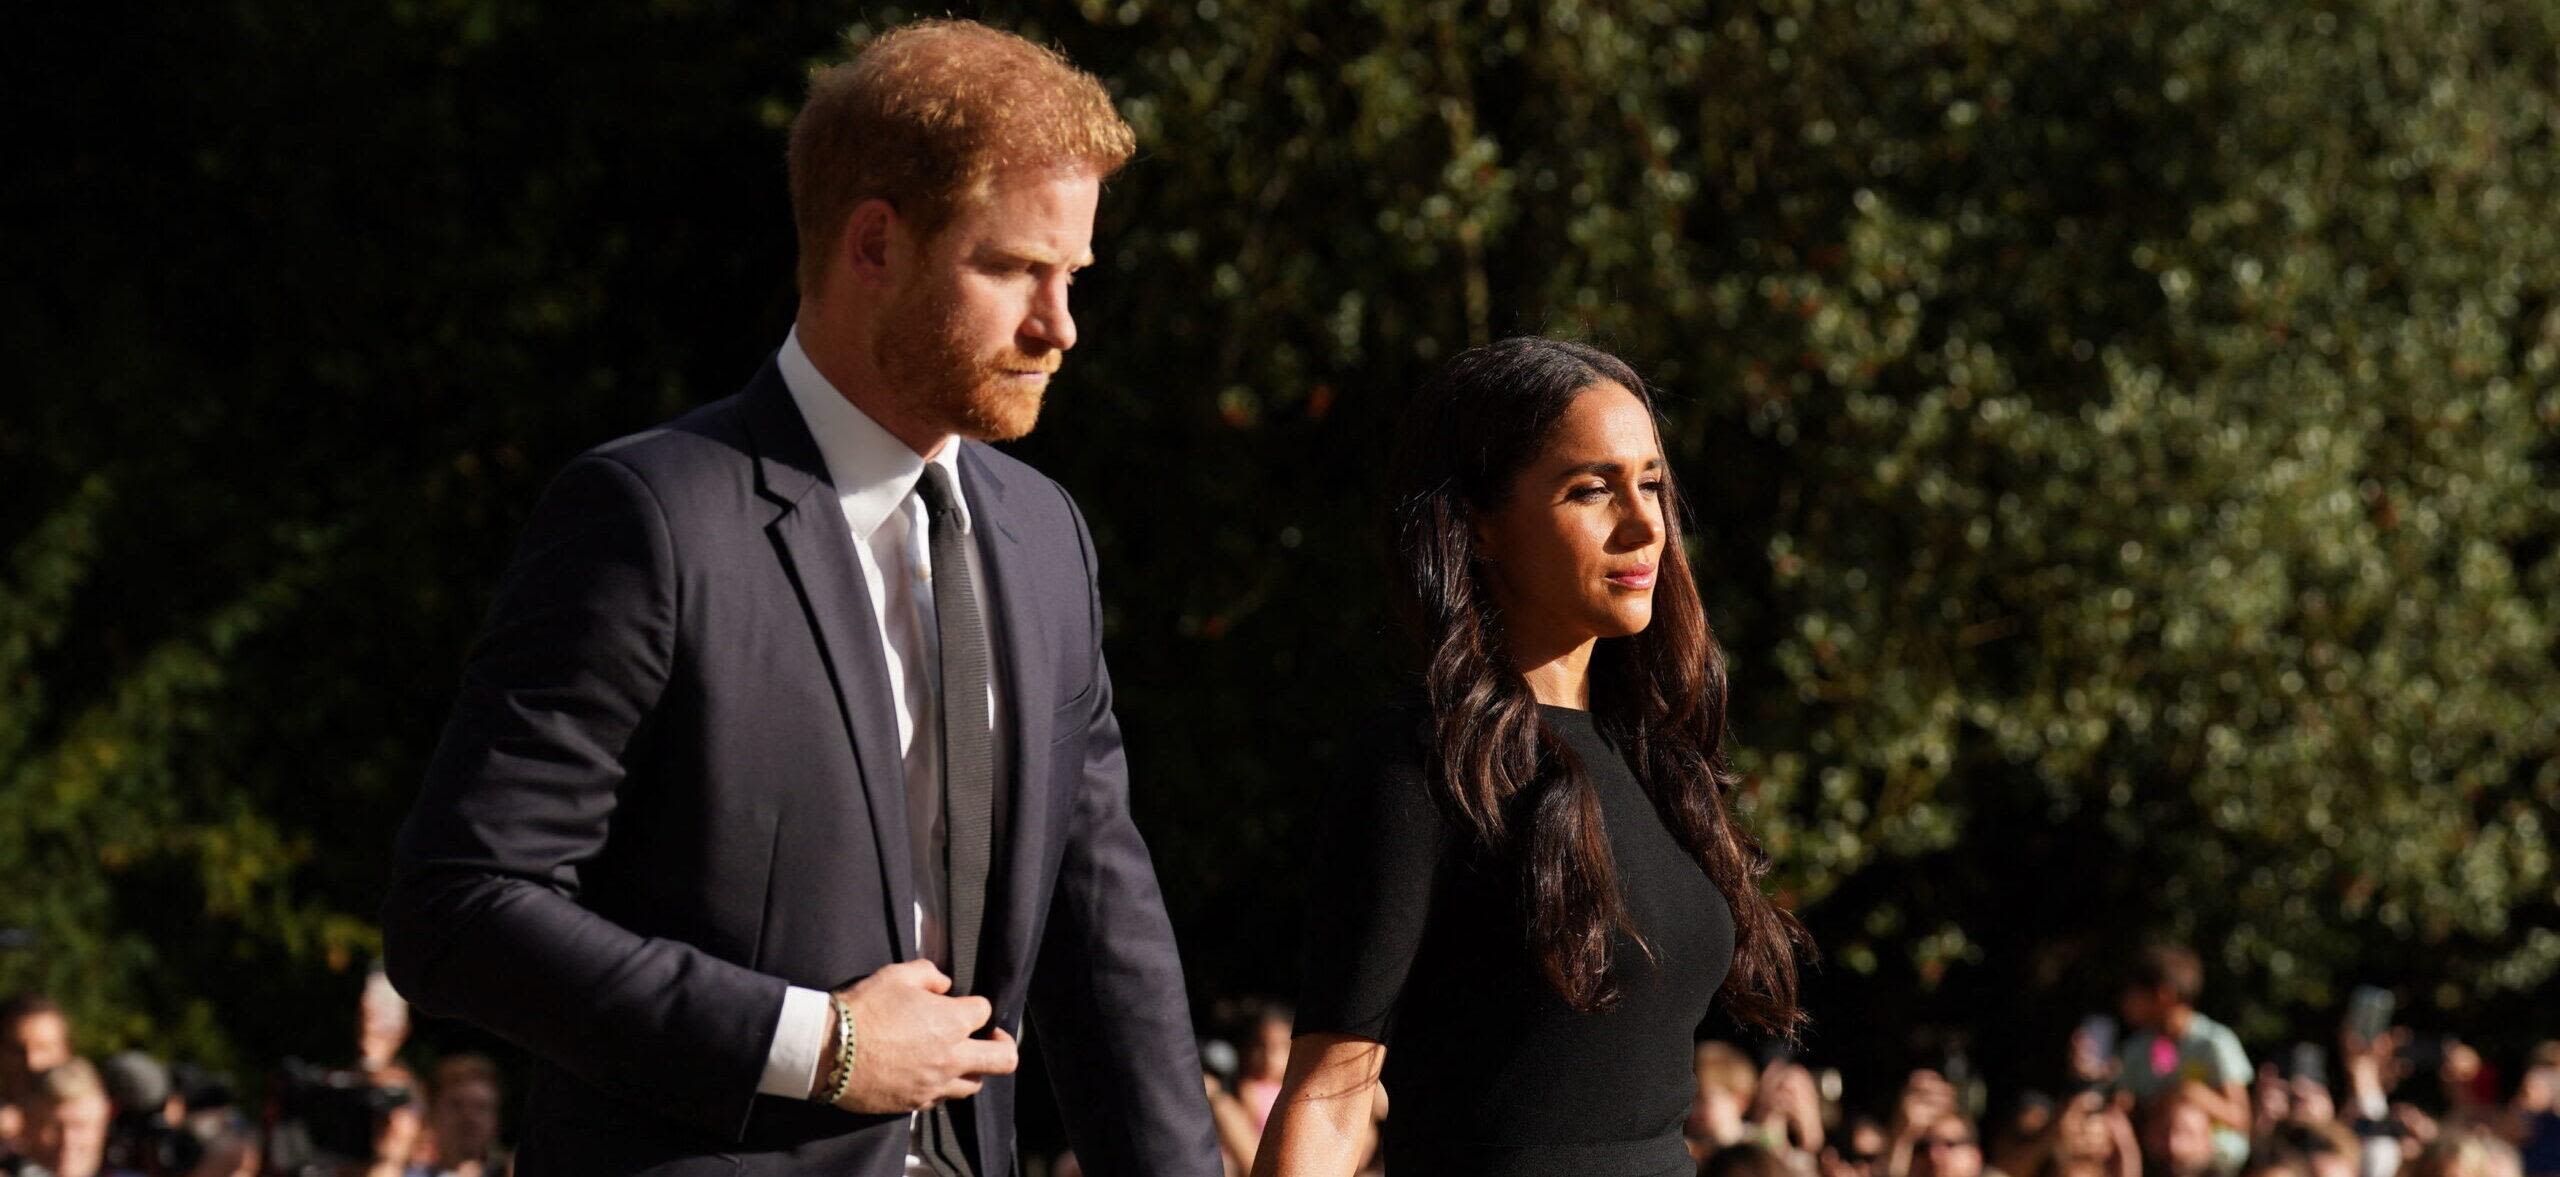 Harry & Meghan Dealt A Major Blow As Their Charity Is Labeled 'Delinquent' By California AG